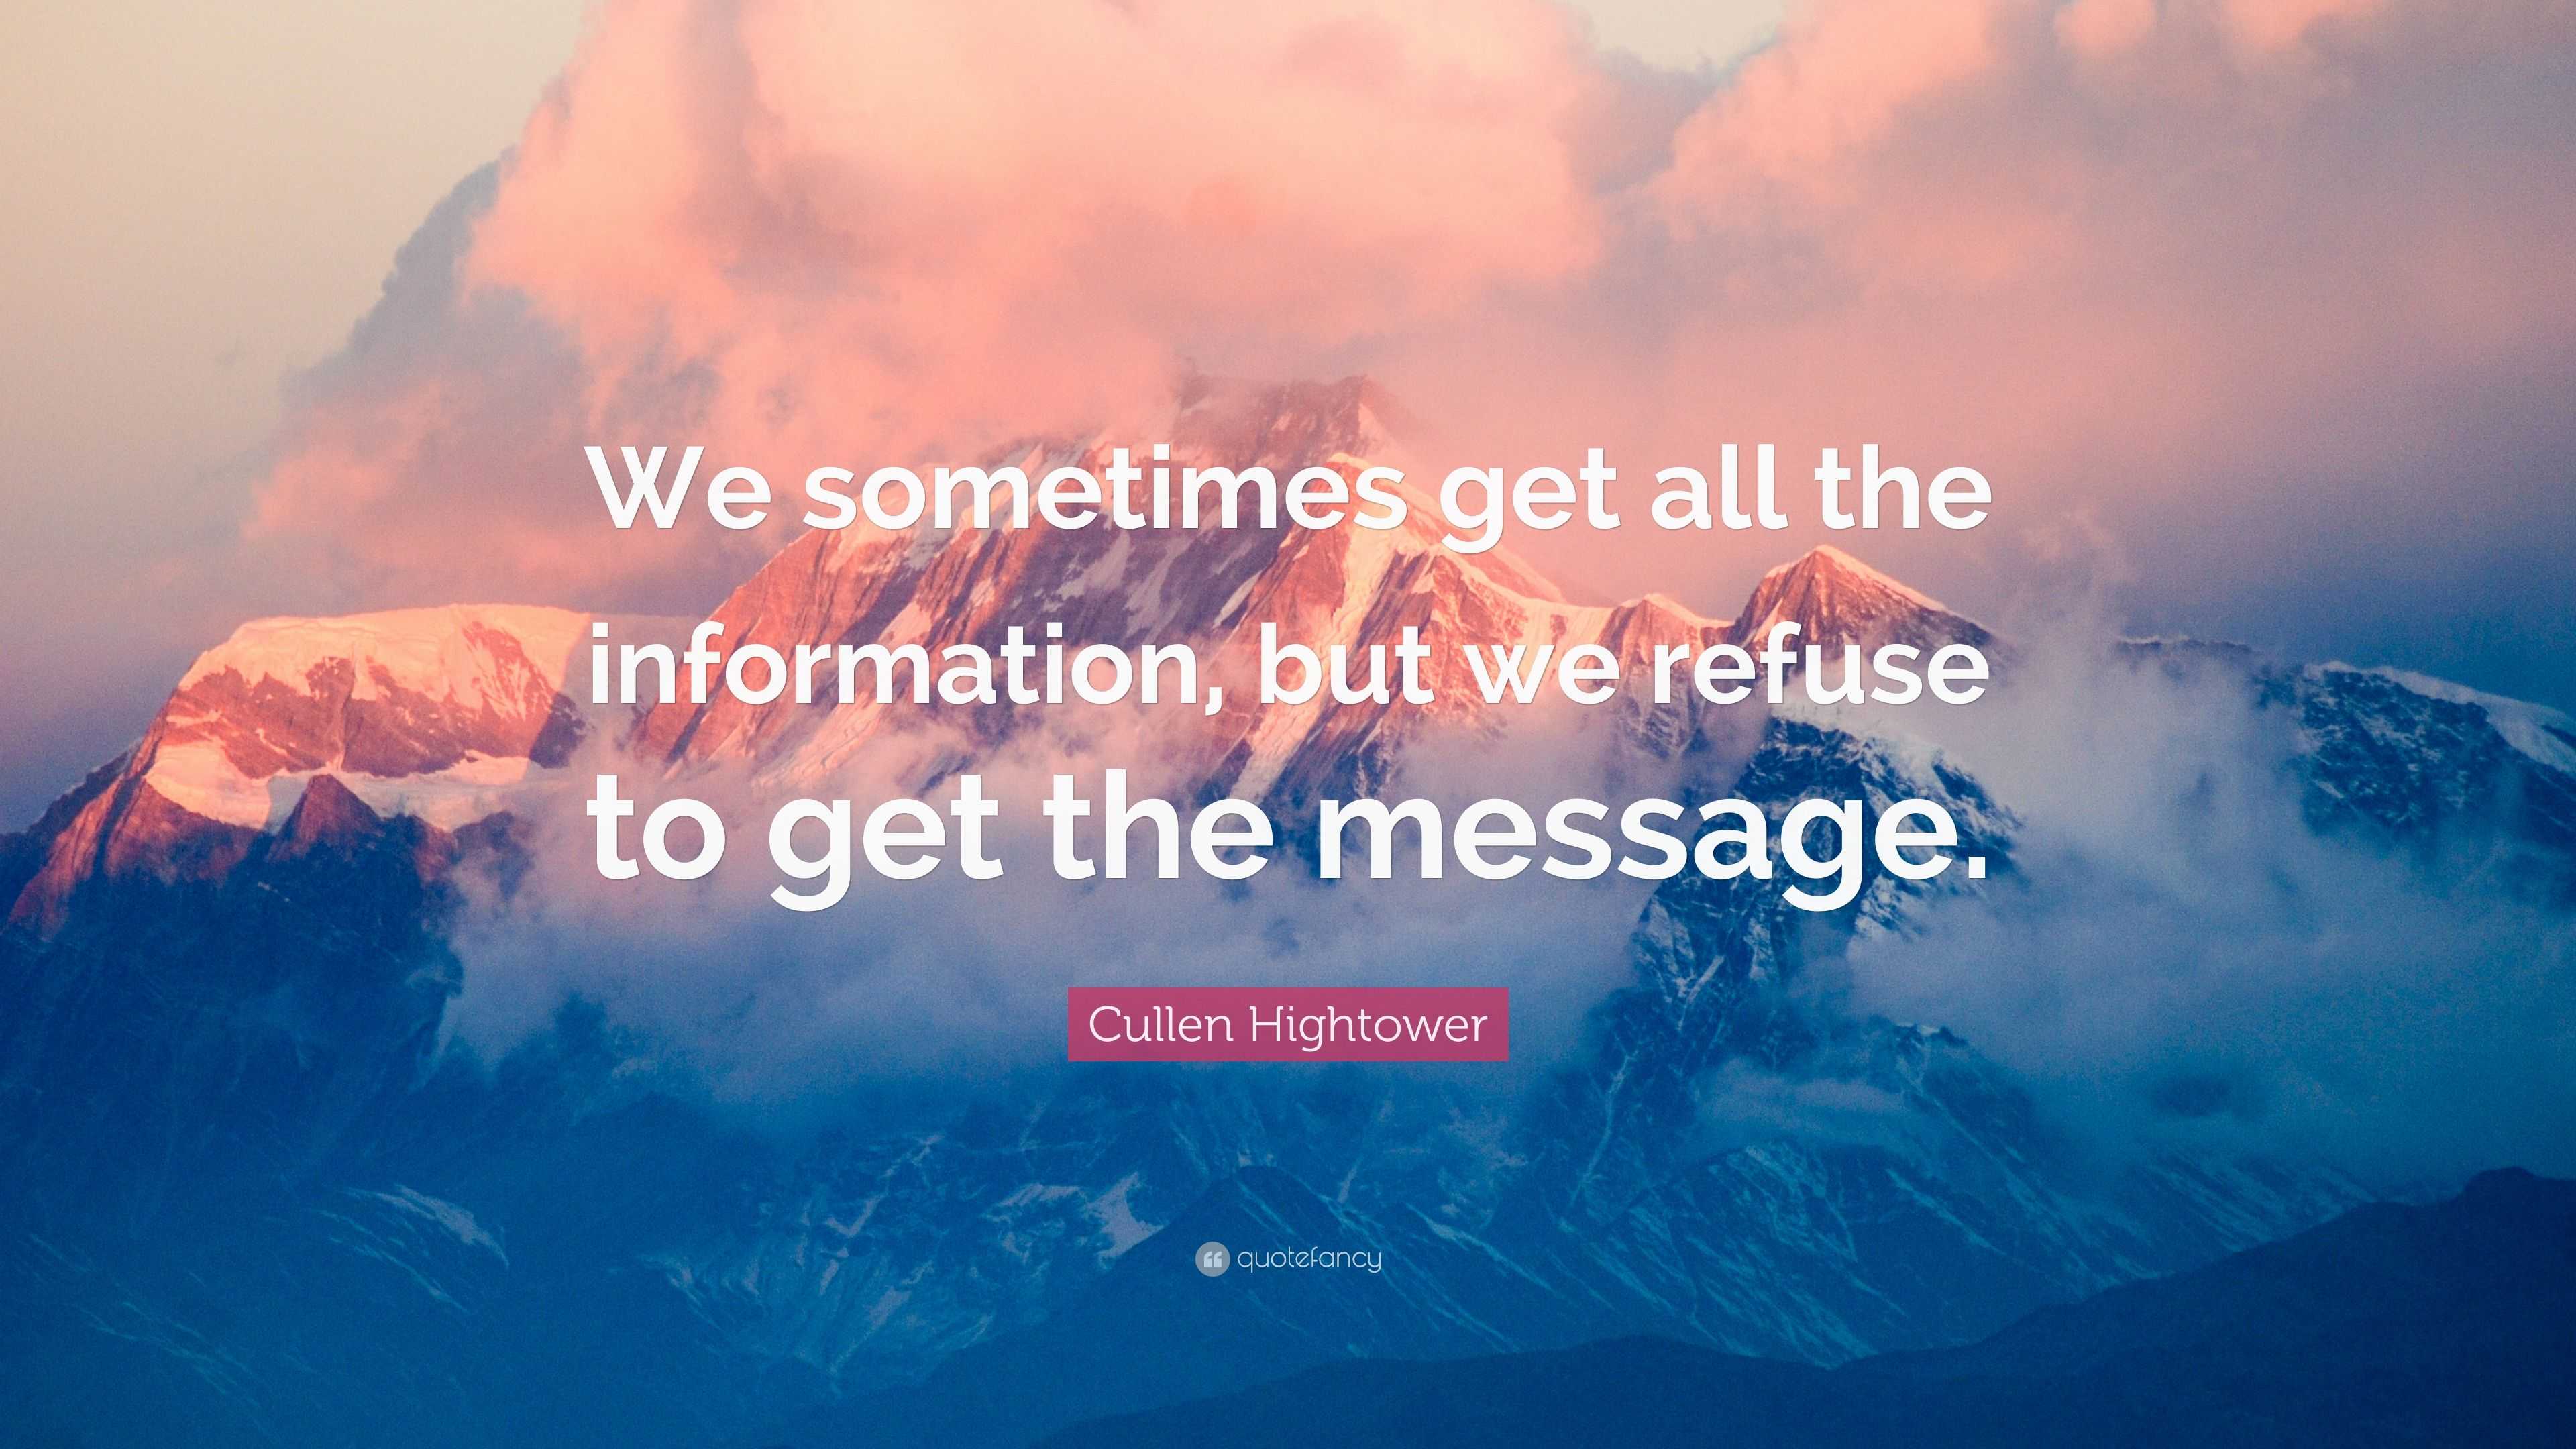 Cullen Hightower Quote: “We sometimes get all the information, but we  refuse to get the message.”